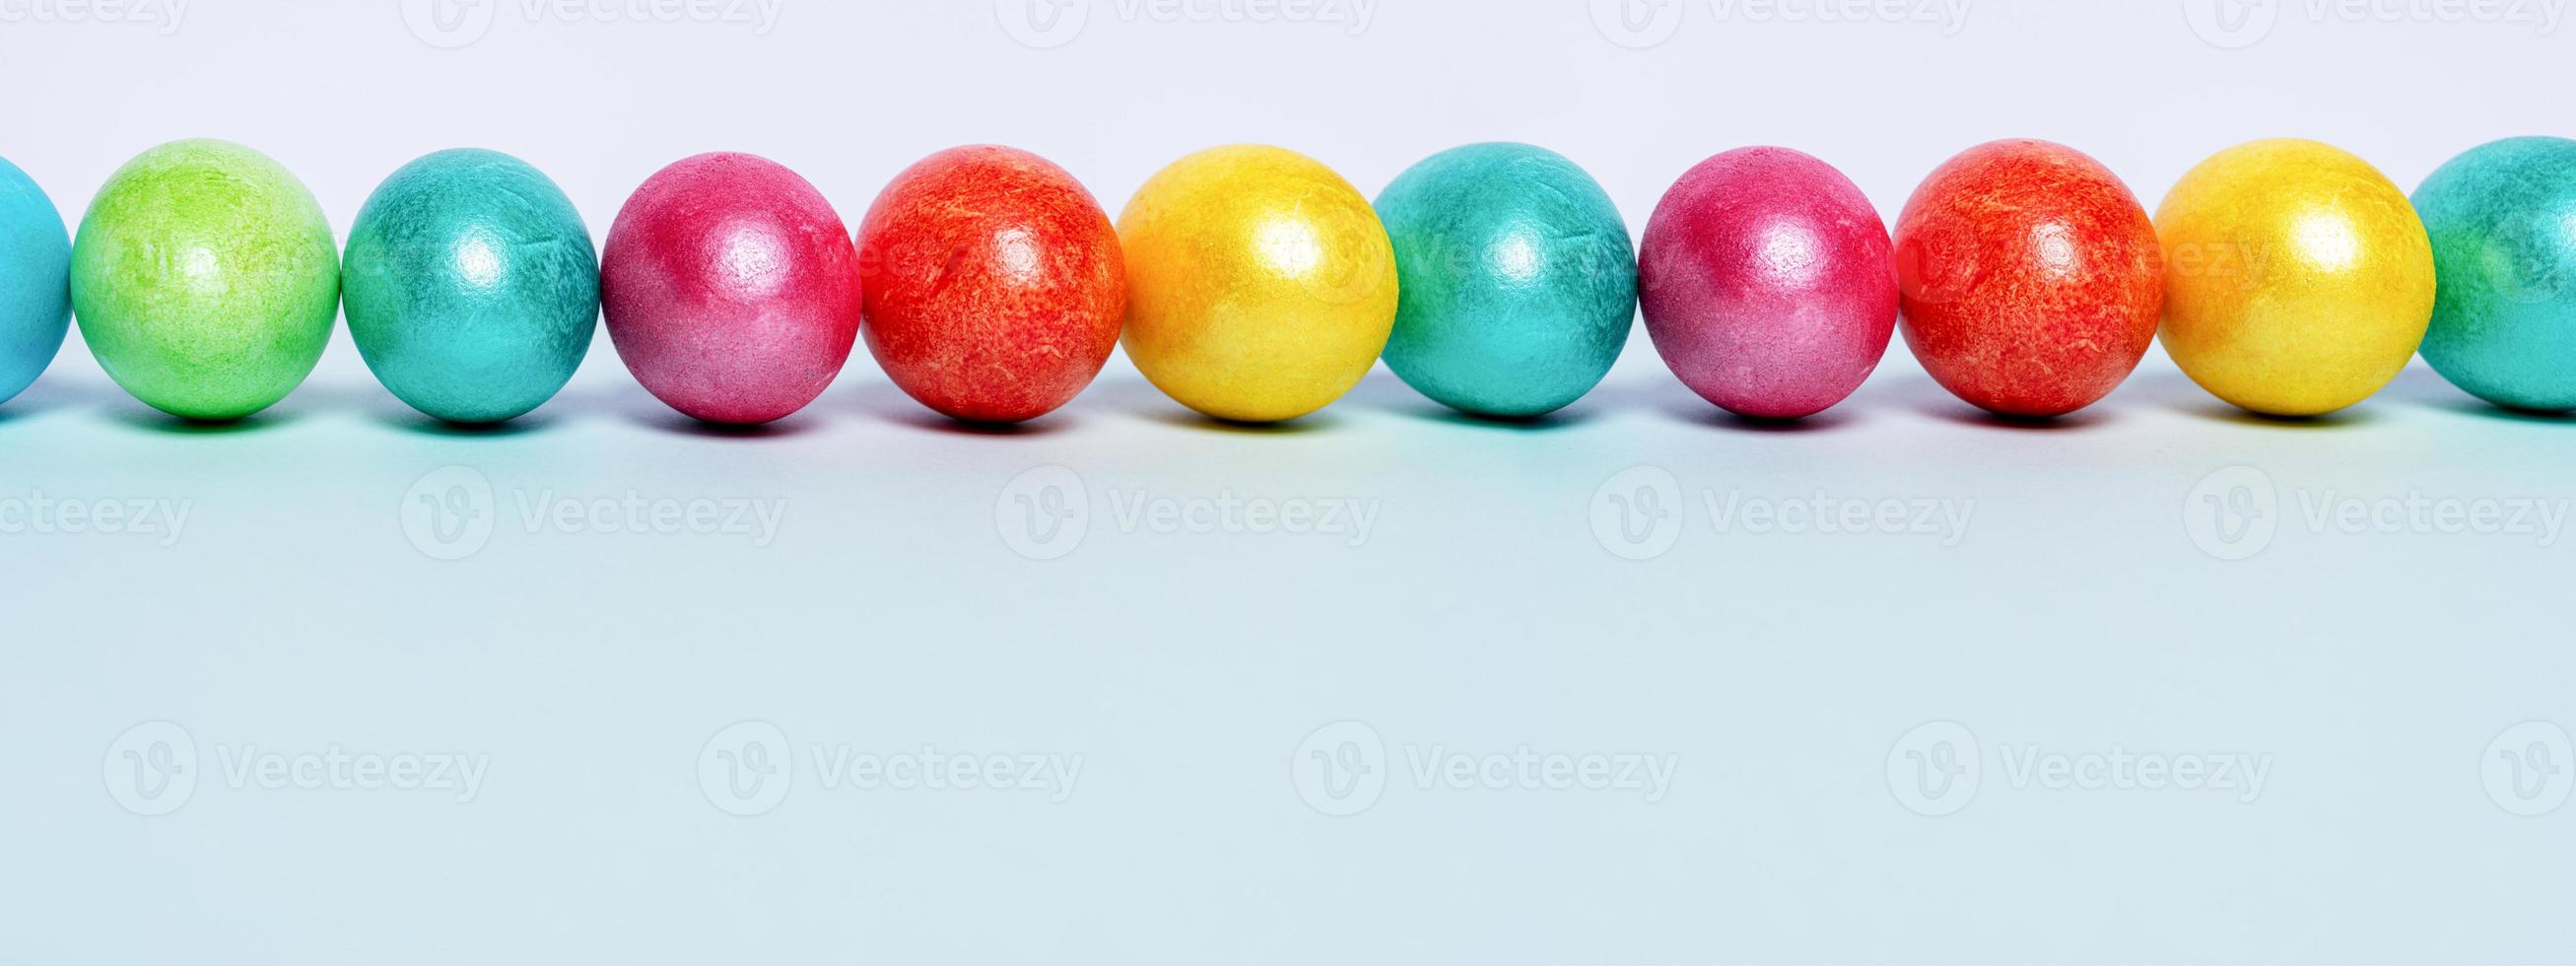 Row of brightlypainted glossy Easter eggs on light blue background. Easter banner. Copy space, low angle. photo